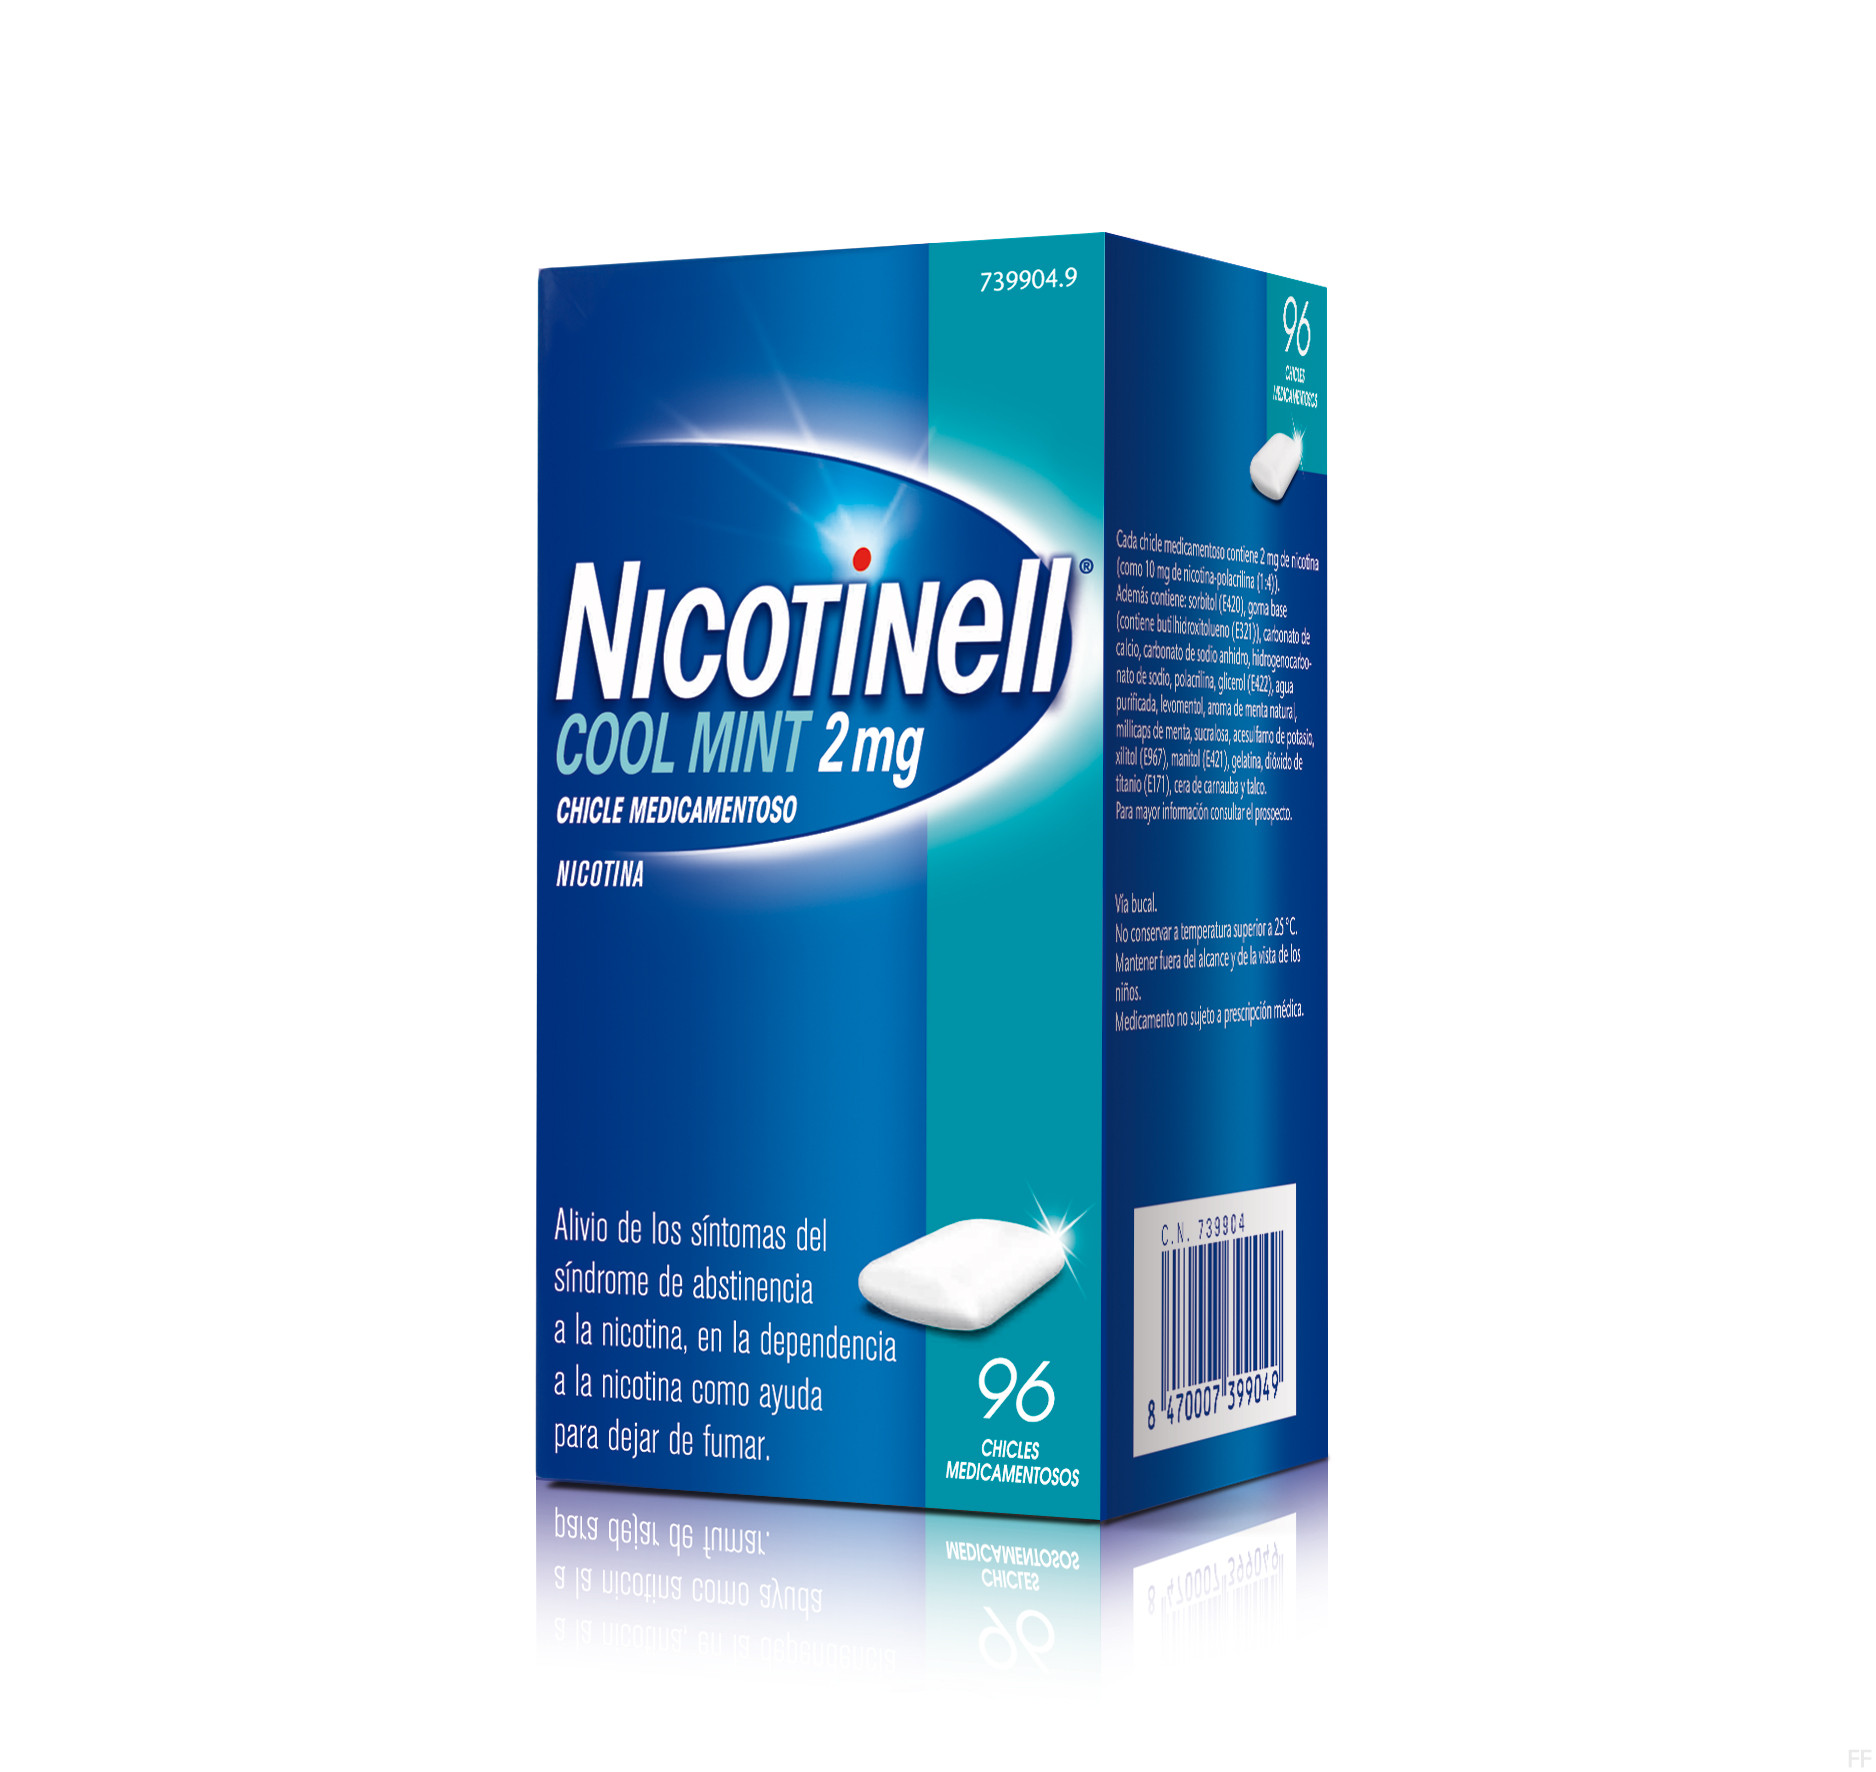 nicotinell cool mint